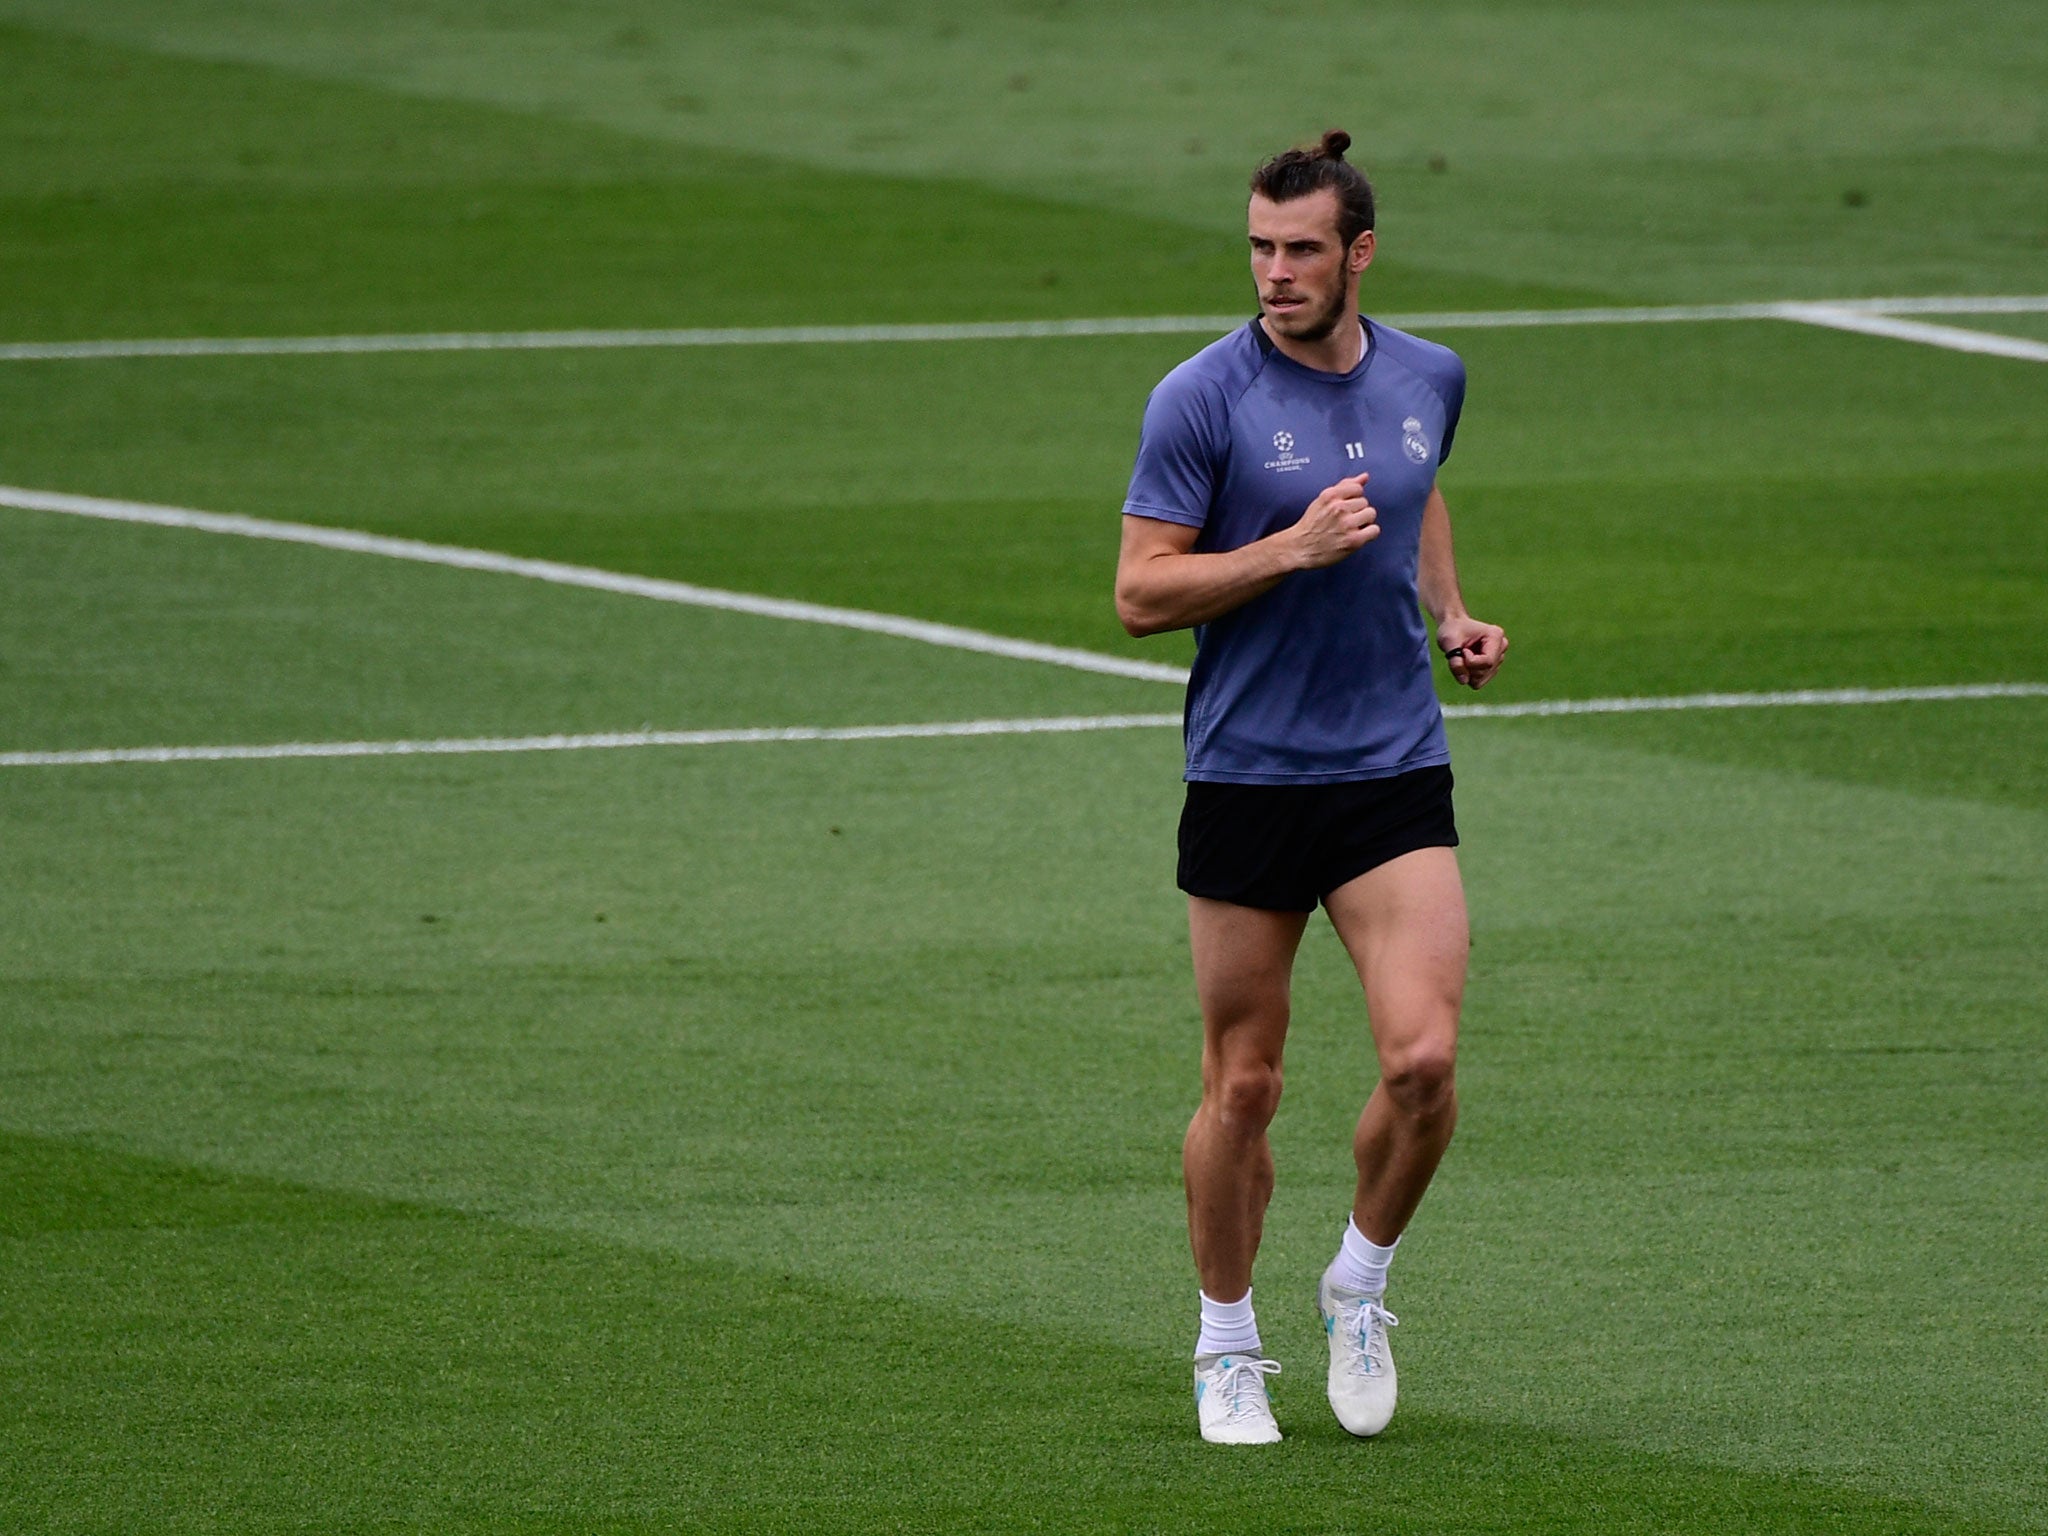 Gareth Bale in training ahead of Saturday's Champions League final in Cardiff